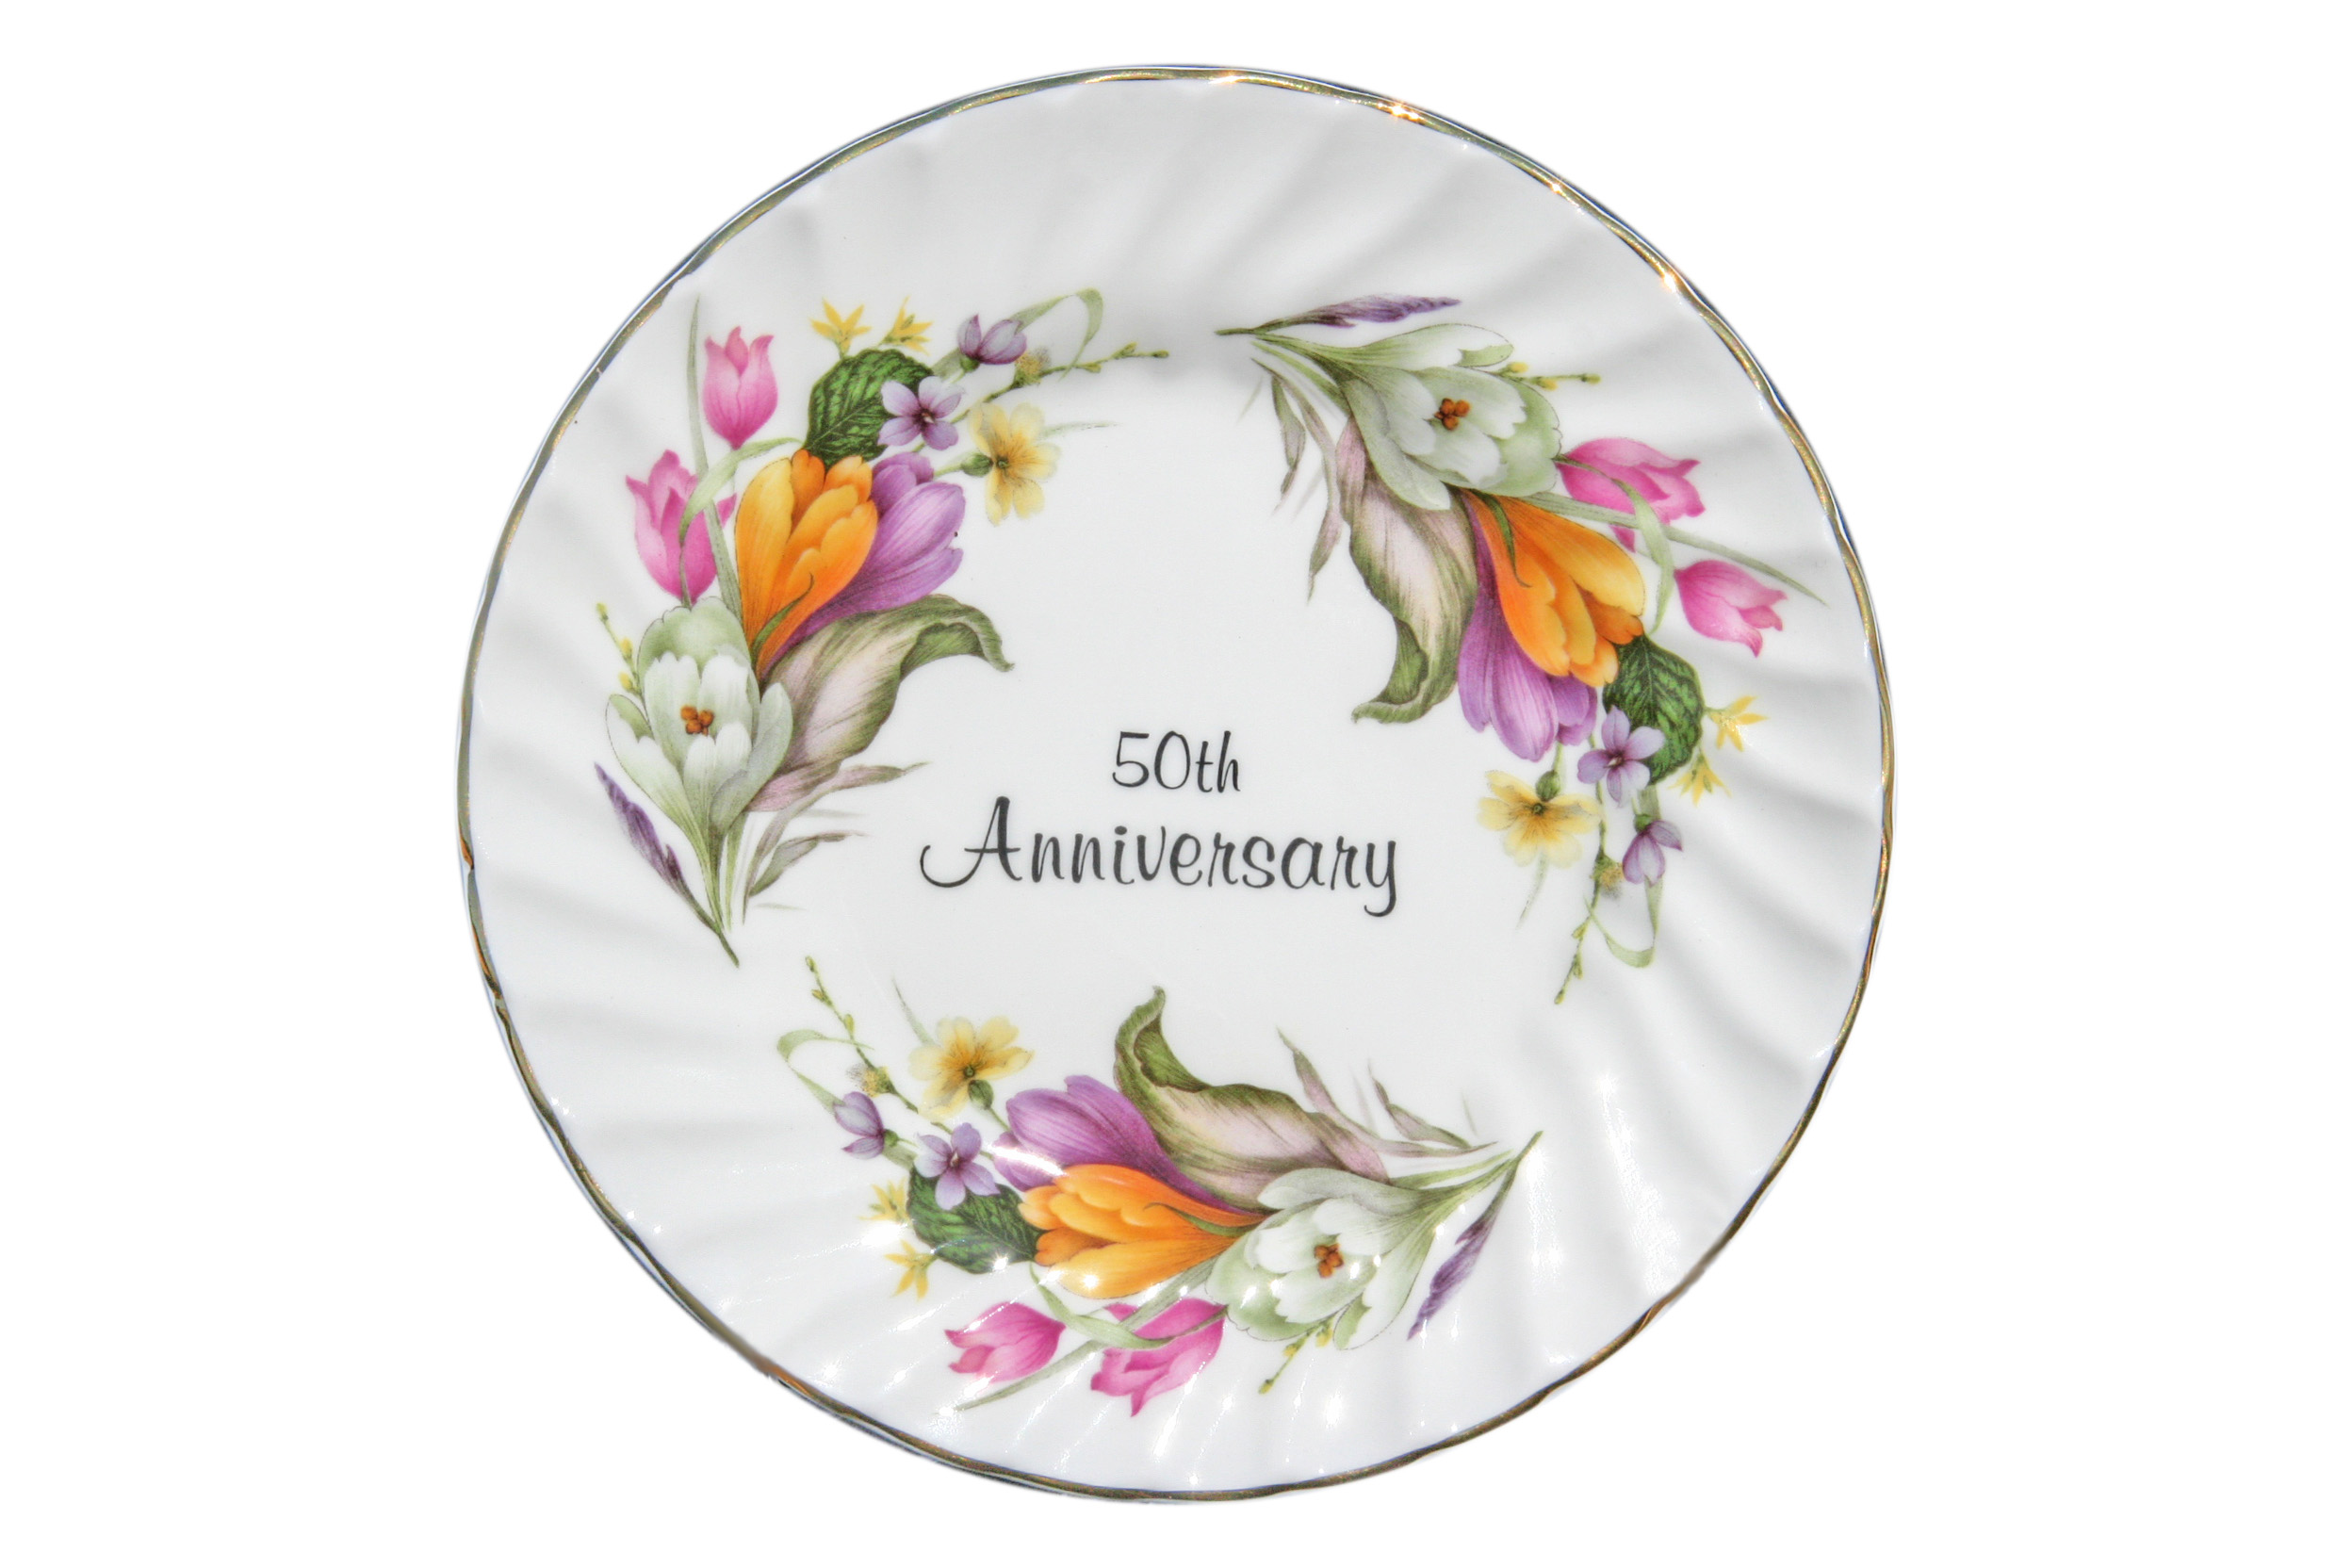 50th Anniversary Plate (6 inch) with stand